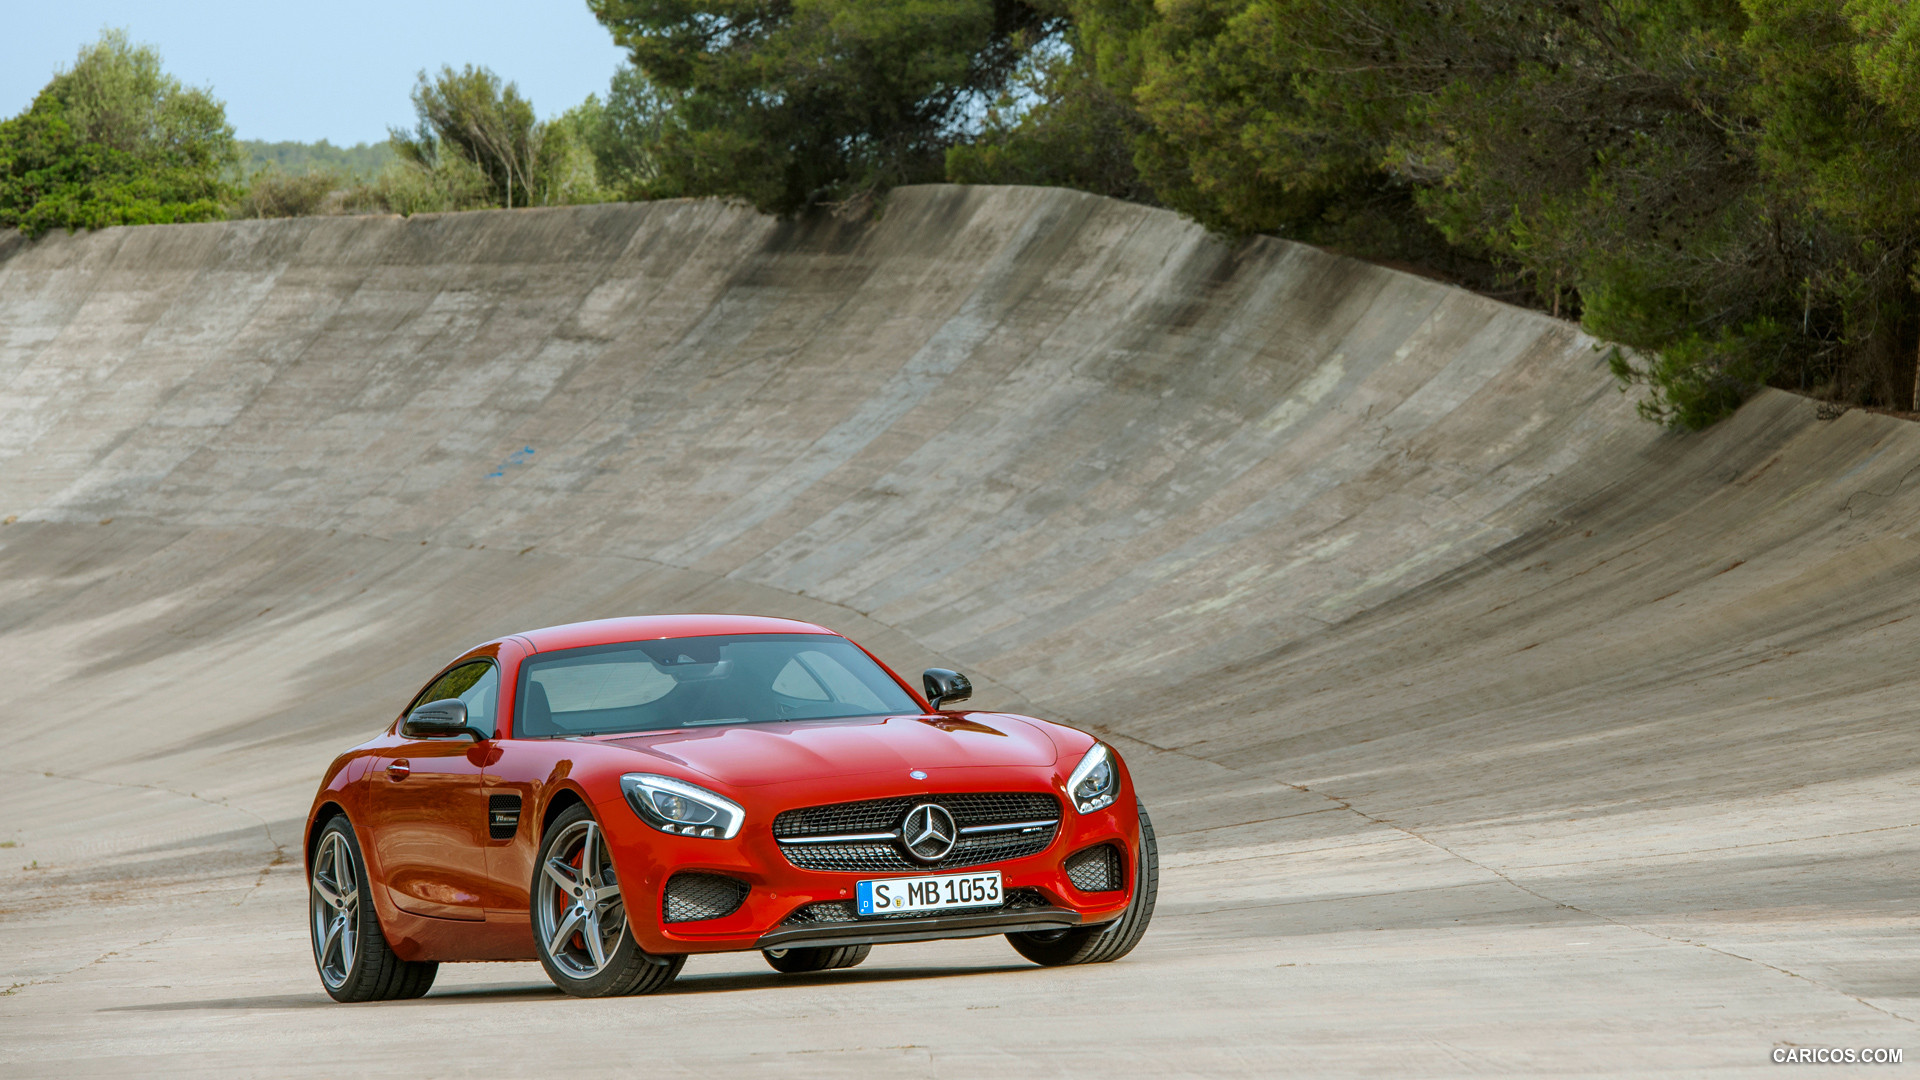 2016 Mercedes-AMG GT (Fire Opal) - Front, #4 of 190